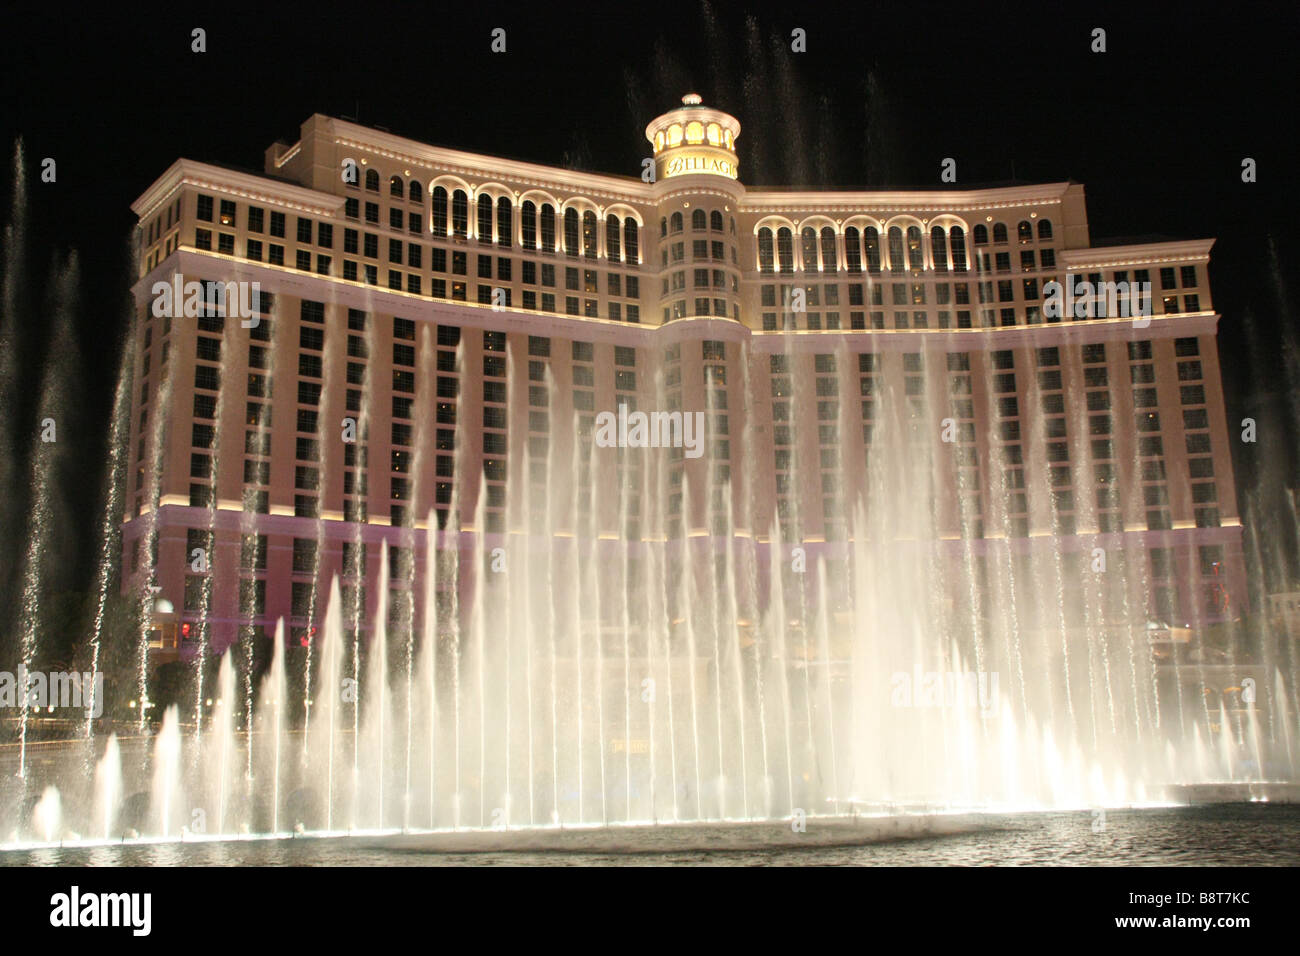 The Fountains at Bellagio, night-time view Stock Photo